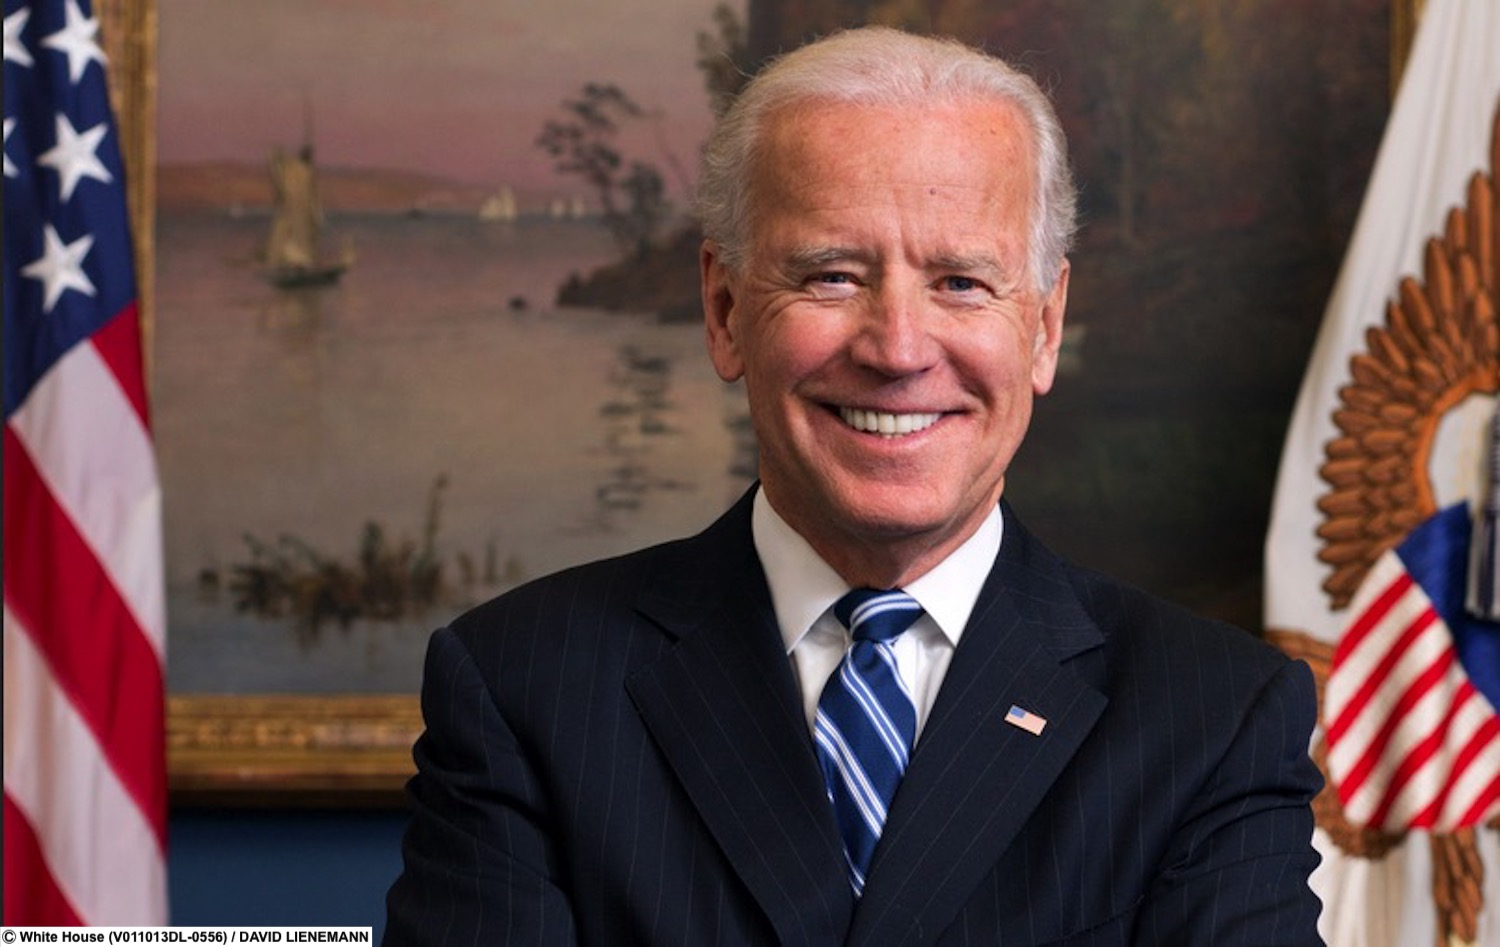 Joe Biden makes a promise to LGBT+ people that can’t be ignored